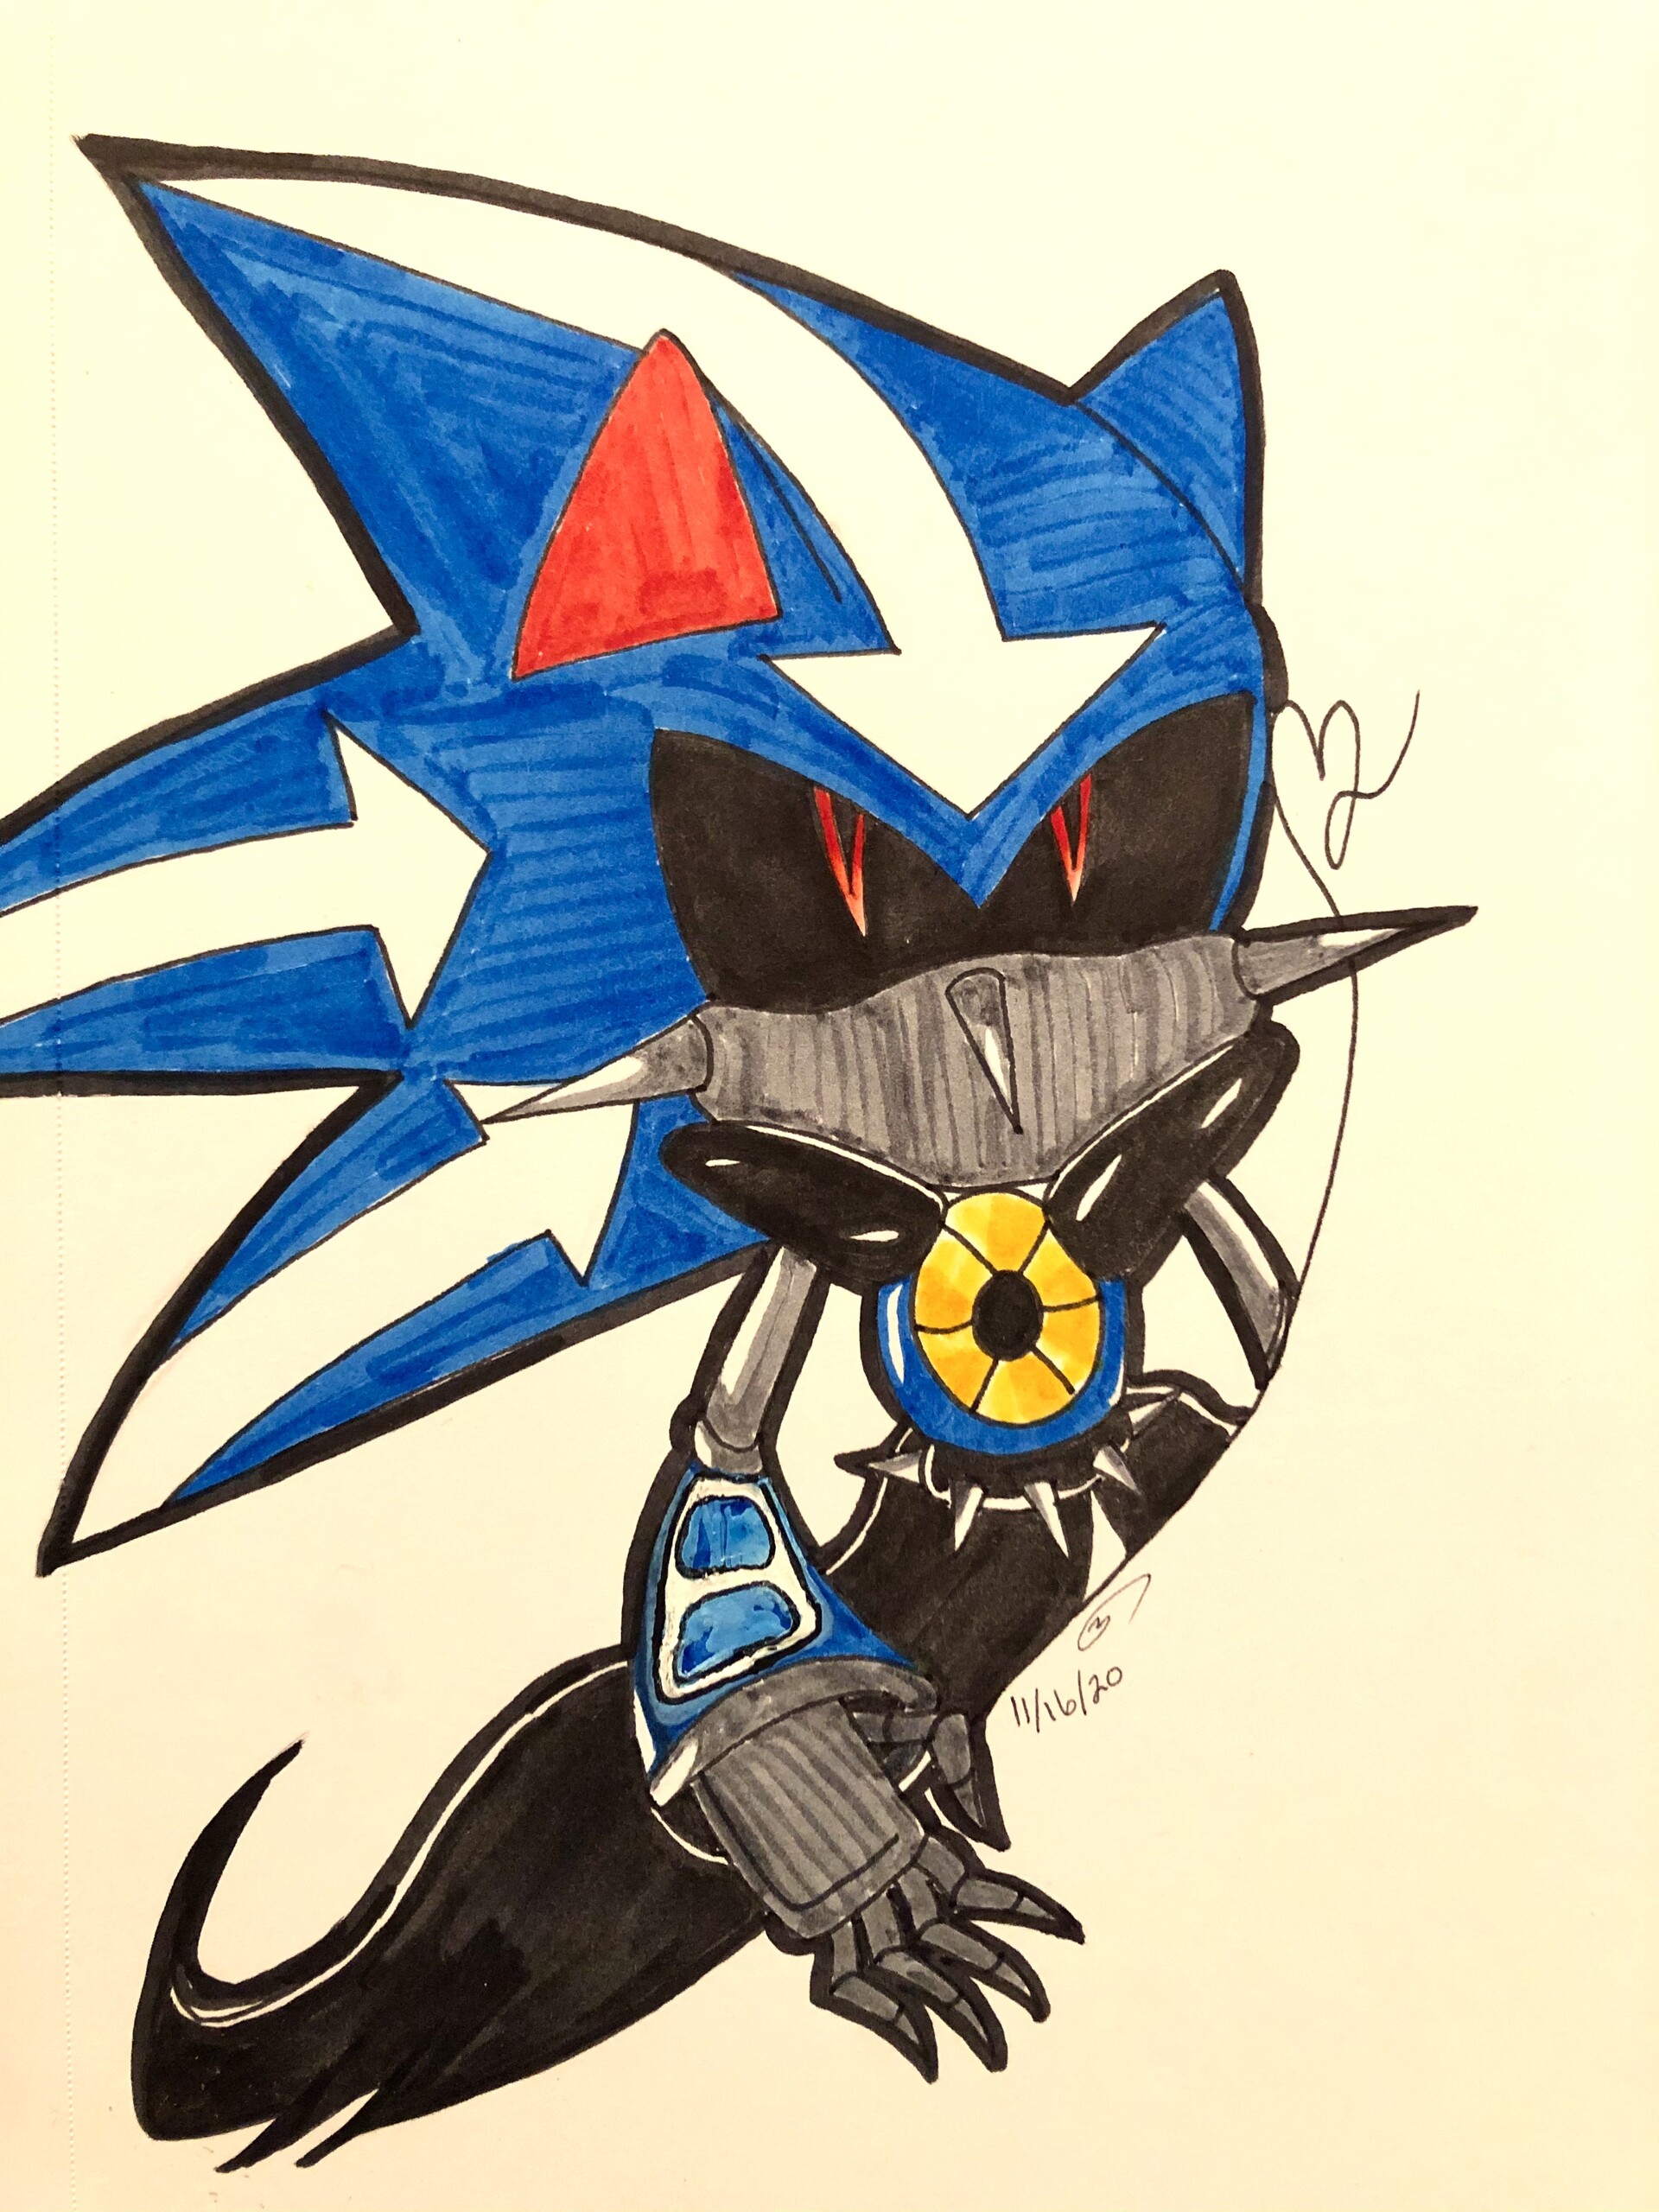 Lazy Chaoz - Commission of Neo Metal Sonic done for Sean H